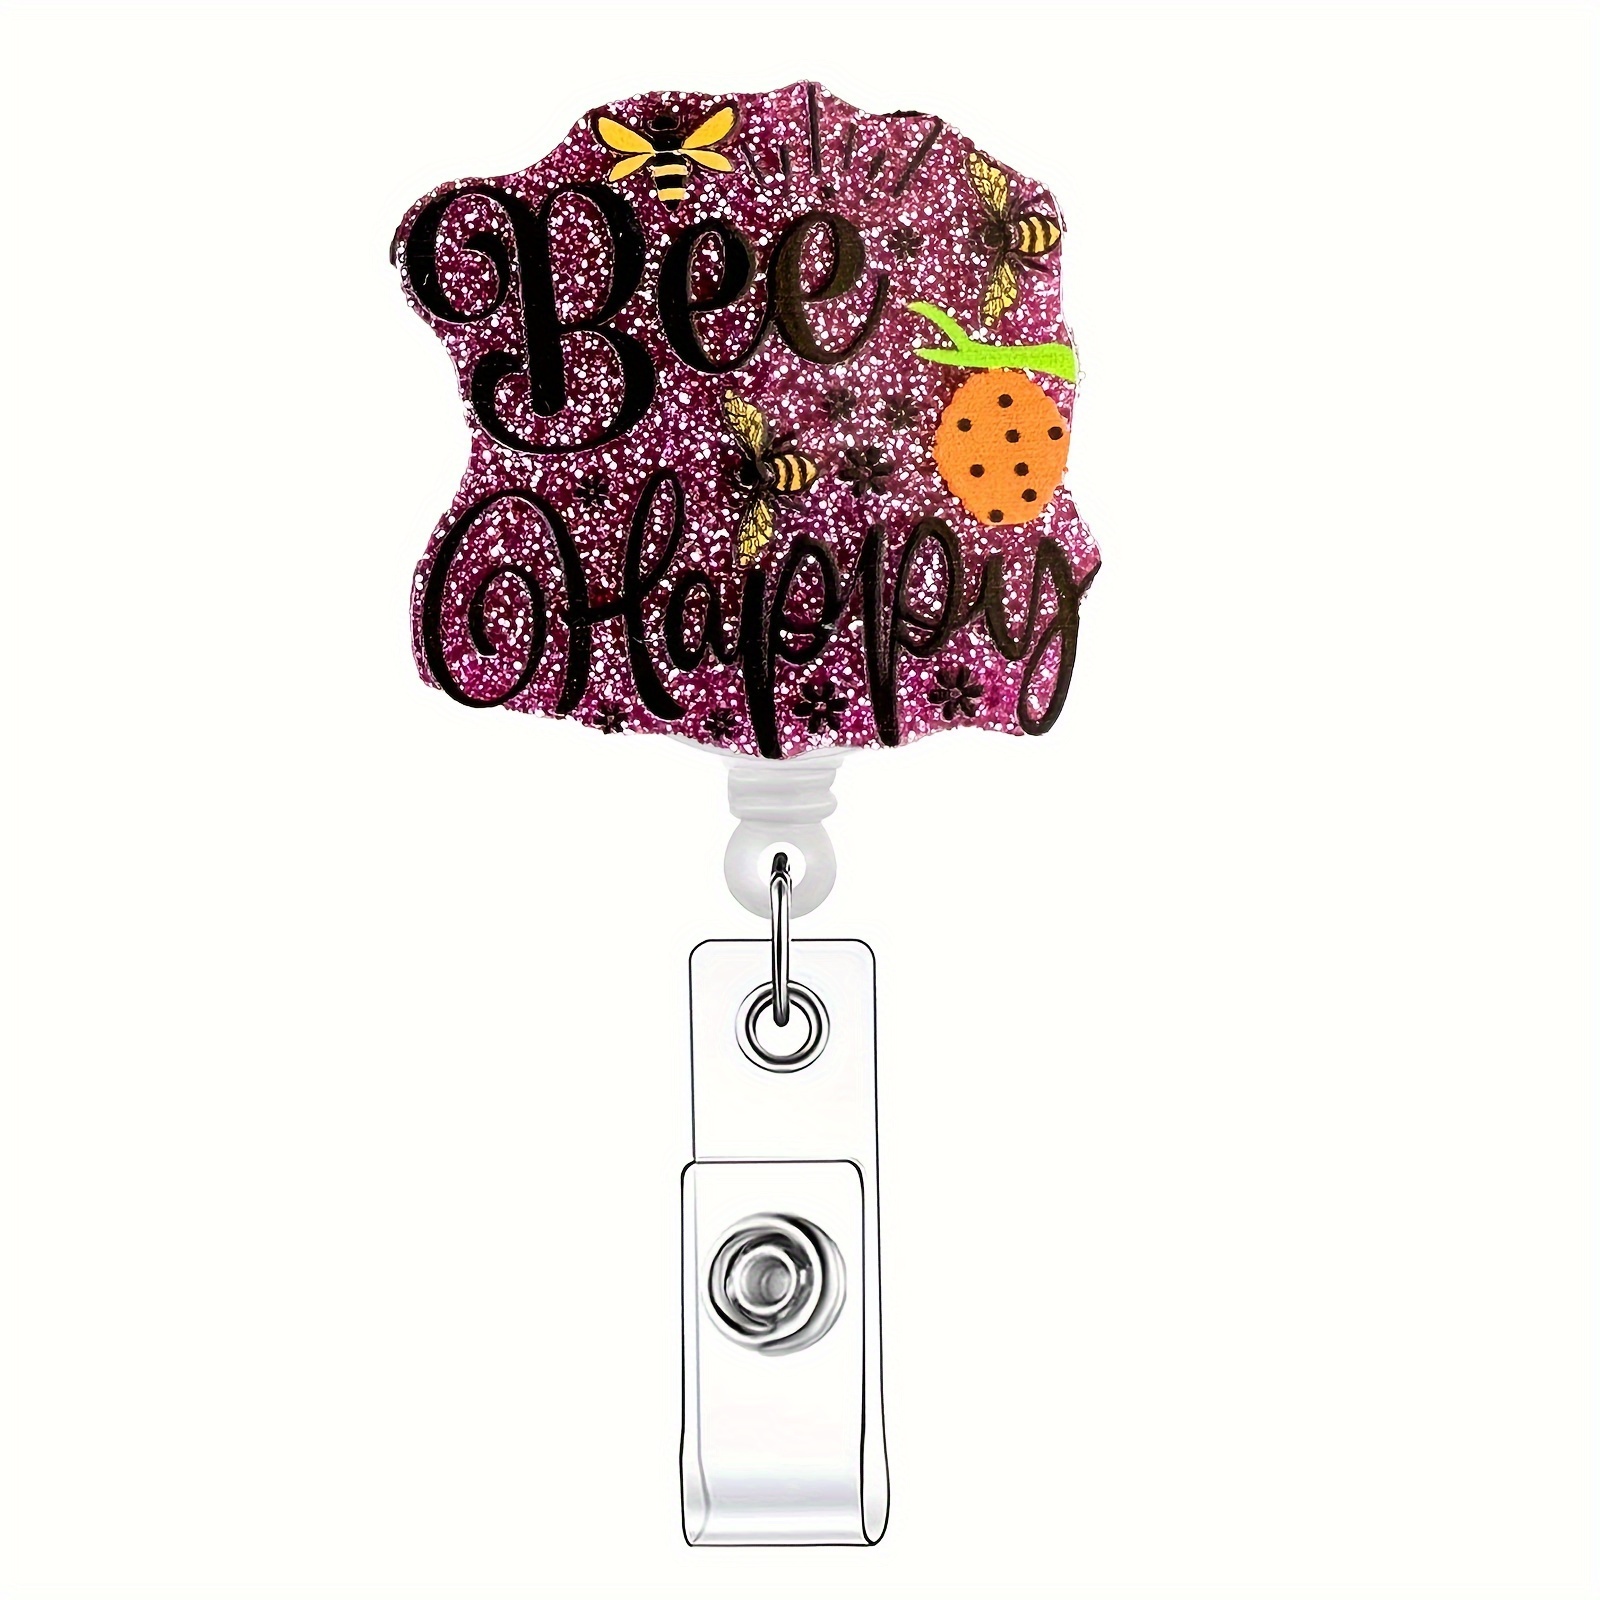 1pc Bee Themed Retractable Badge Reel,Name Badge Holder with ID Clip for Nurse Doctor Volunteer Employee,Cat,Car,Flower,Flowers,Valentine's Day